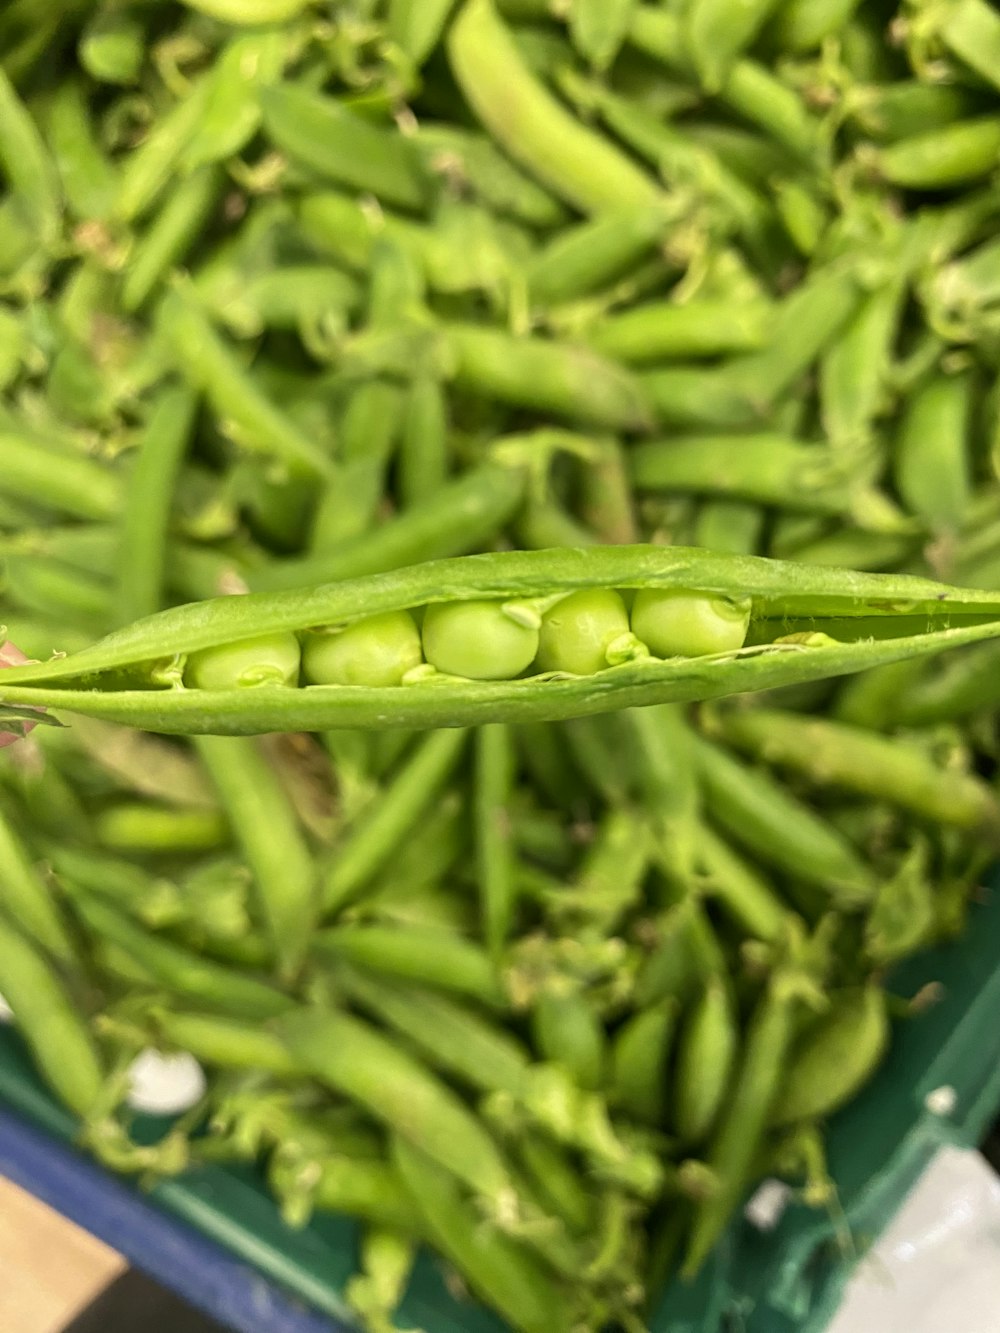 a close up of a pea pod on a table